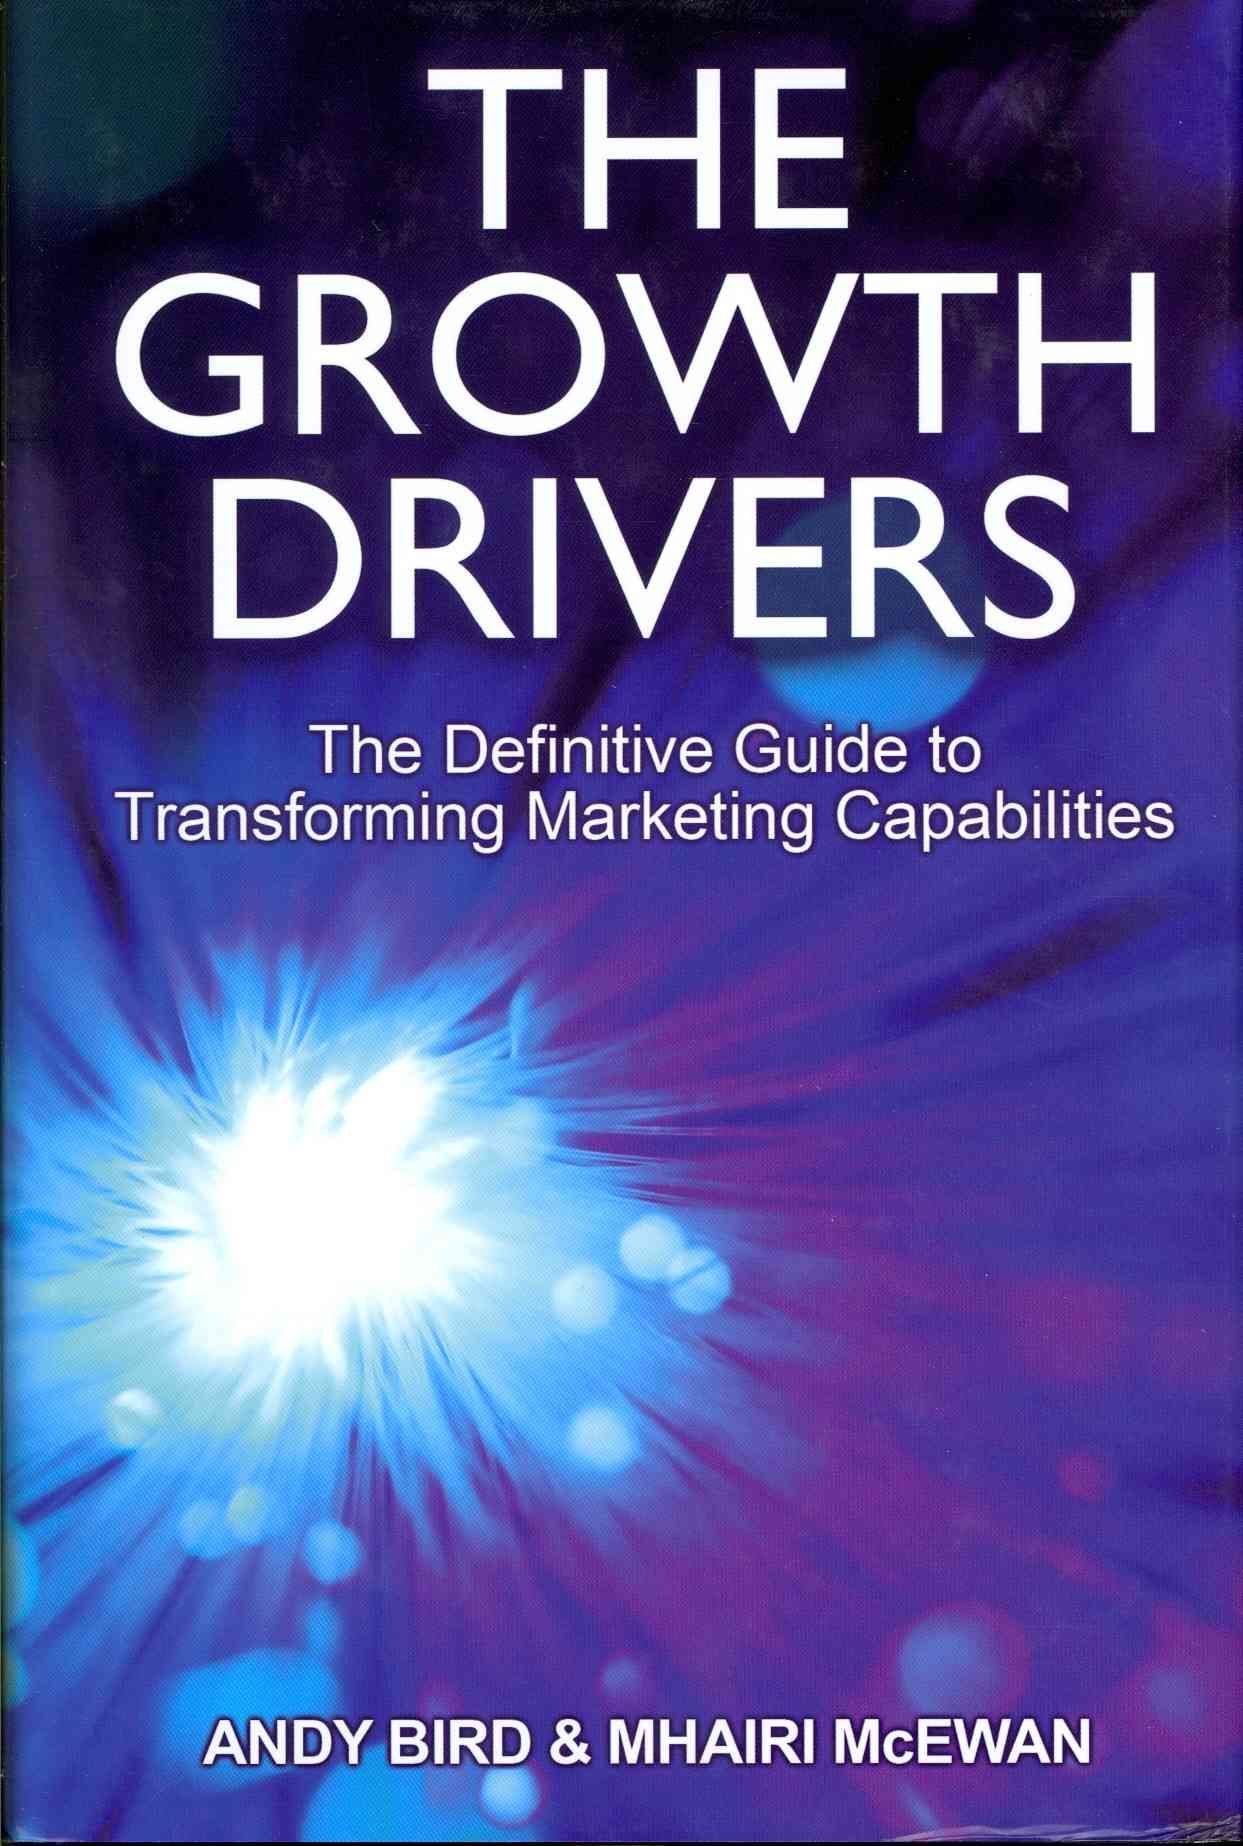 The Growth Drivers - The Definitive Guide to Transforming Marketing Capabilities